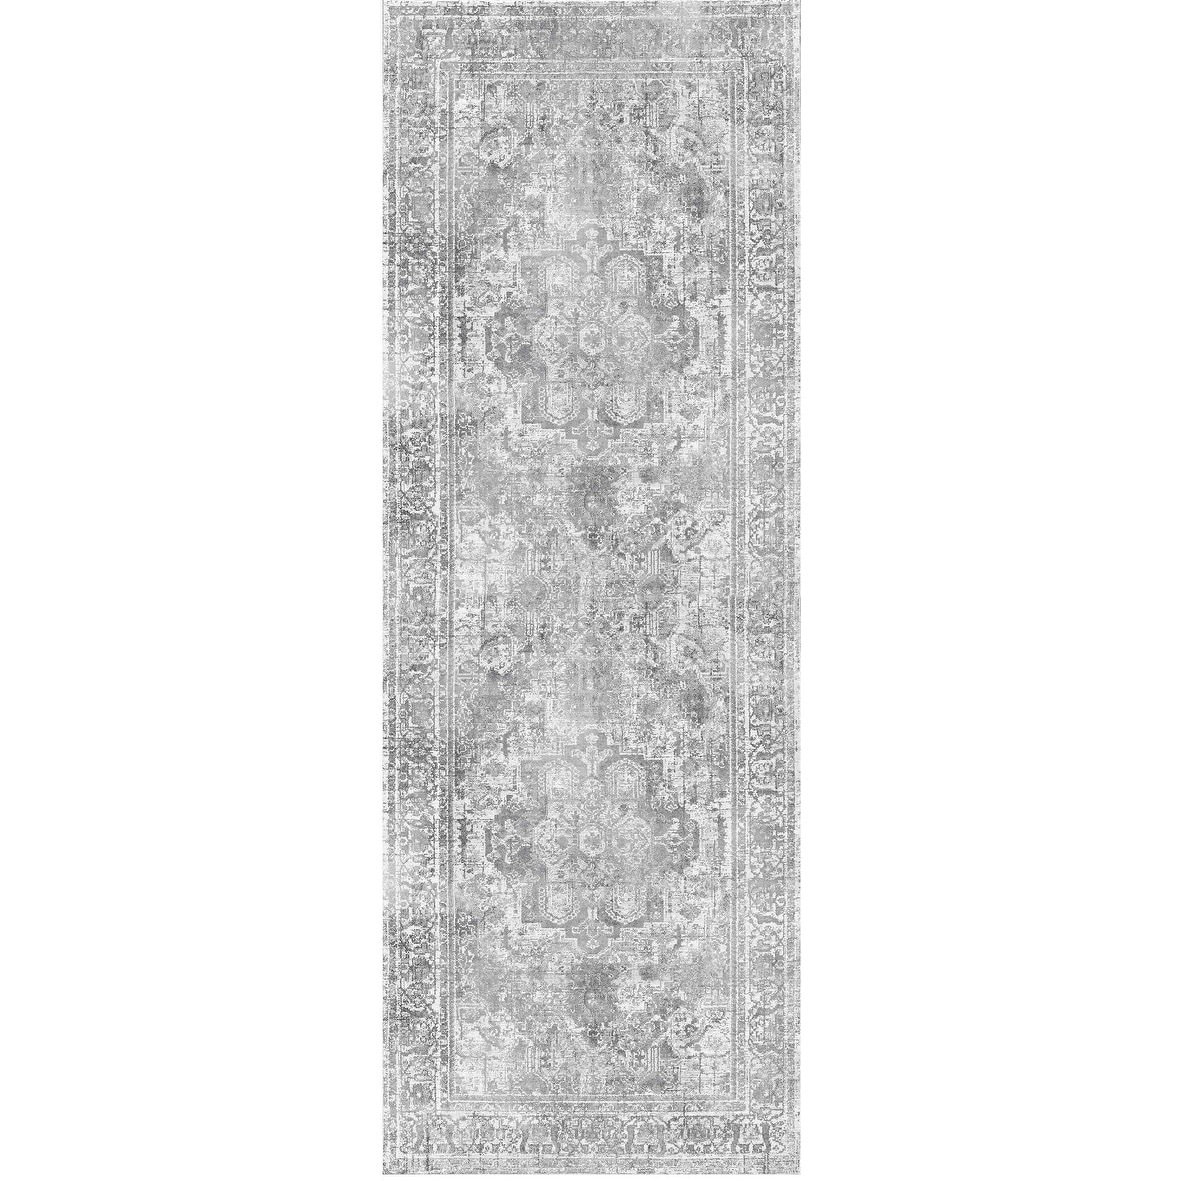 https://ak1.ostkcdn.com/images/products/is/images/direct/59e3cb20e707087434c3a486f0ce9246a3d744af/The-Rug-Collective-Distressed-Vintage-Chilaz-Grey-Rug-Machine-Washable-Area-Rug.jpg